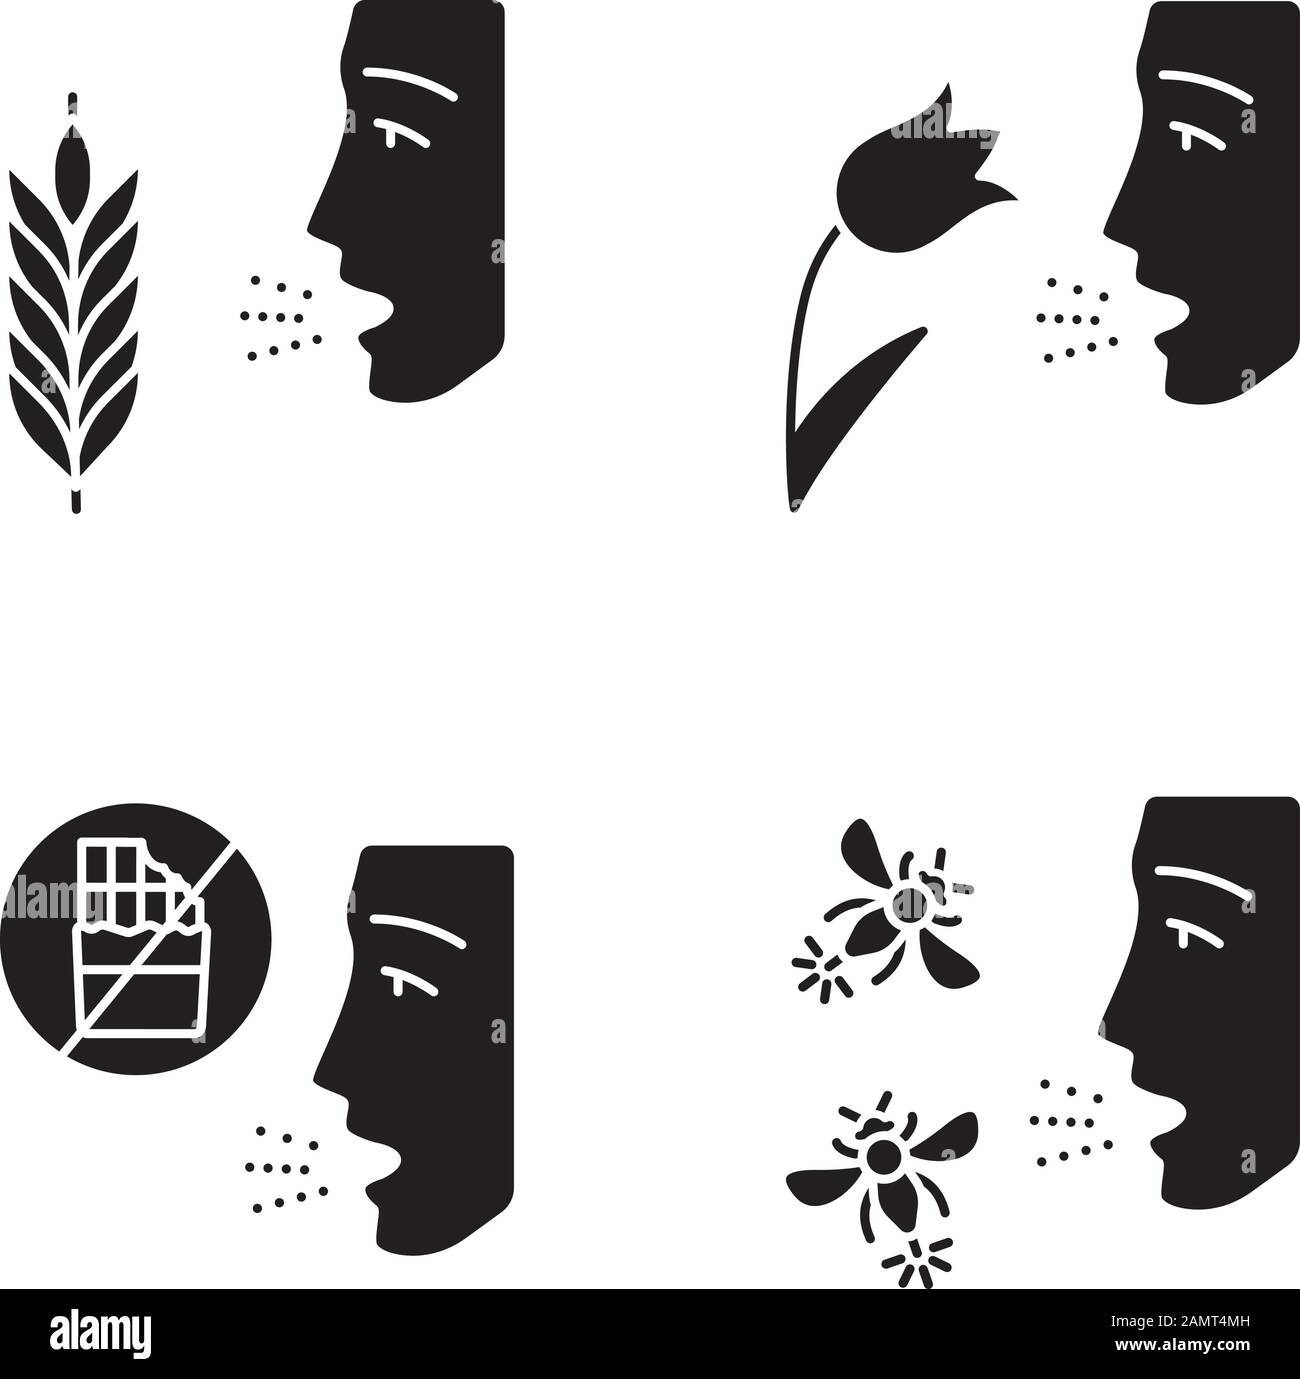 Allergies glyph icons set. Hay fever, allergy to food and insects stings. Sensitivity of immune system. Allergen sources. Medical problem. Silhouette Stock Vector